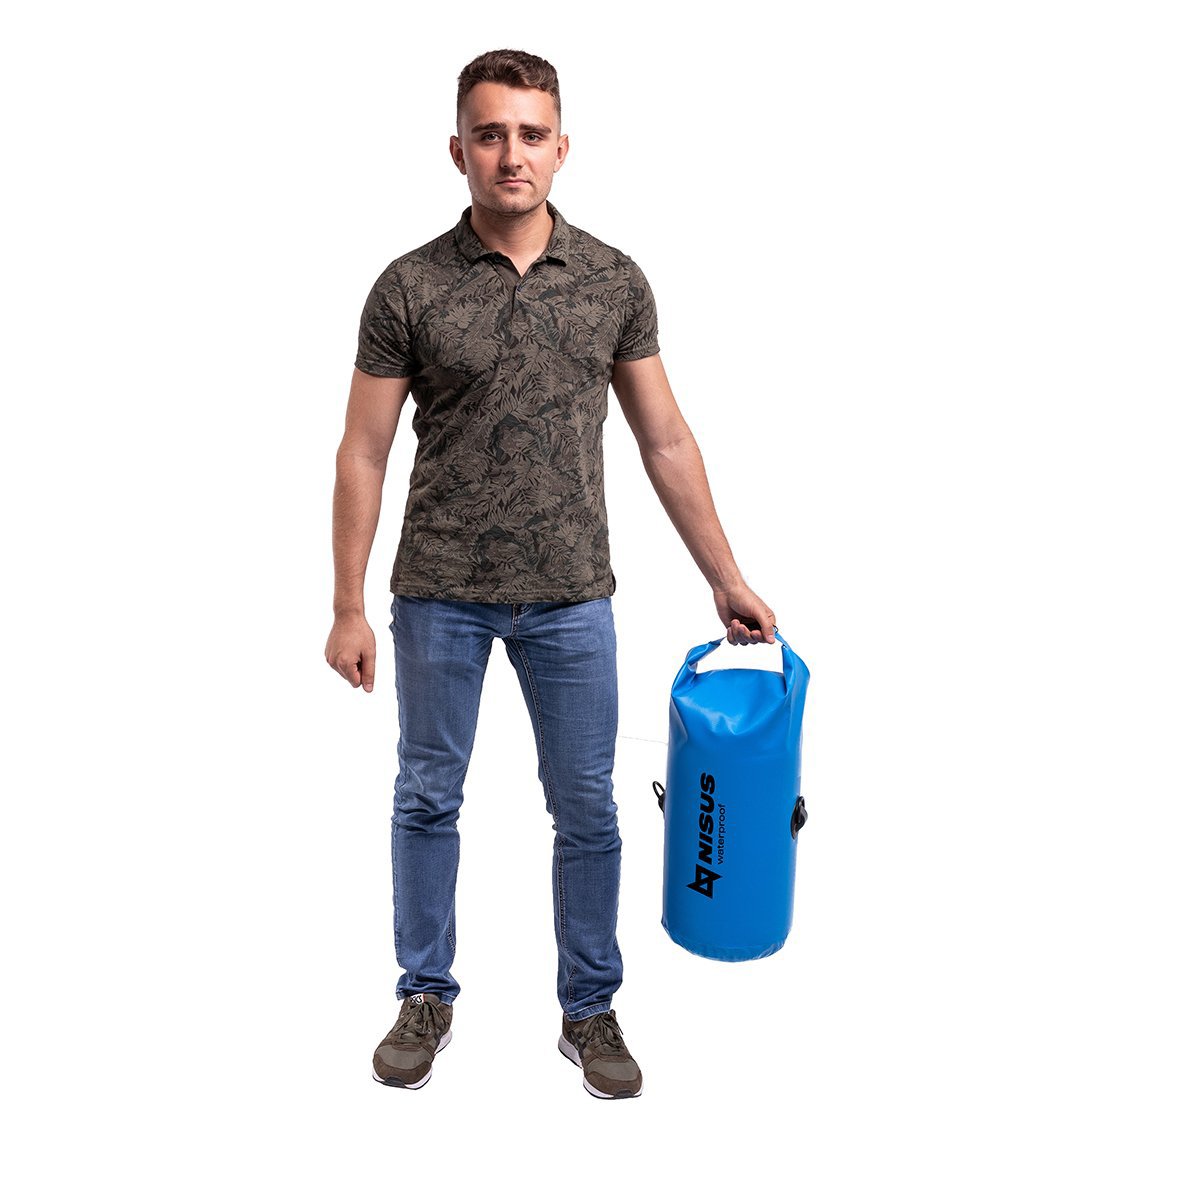 A man carrying a 15 L Small Portable Waterproof Dry Bag